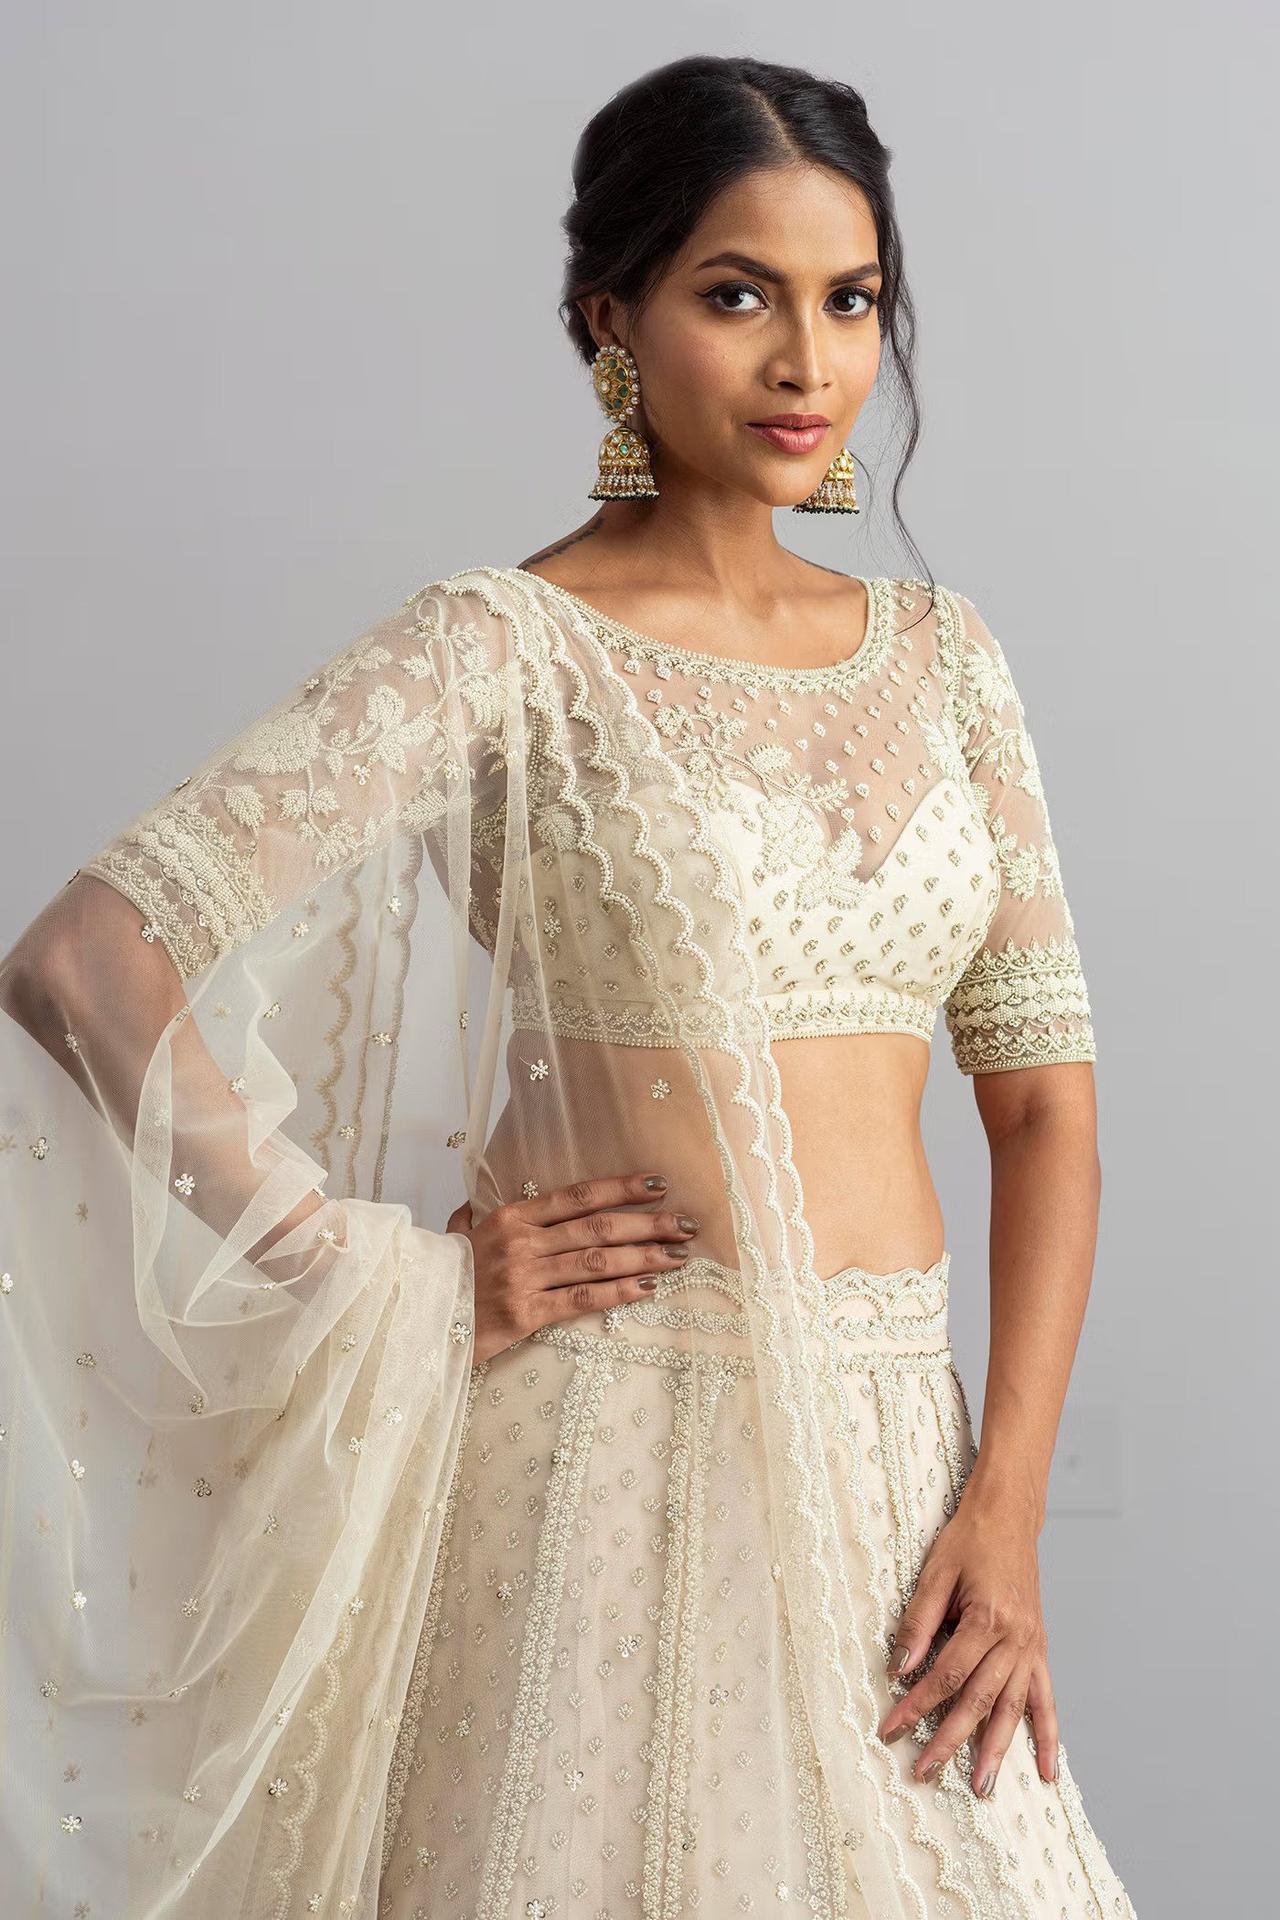 20 Latest Lehenga Blouse Designs For Women To Try In 2023 | Wedding lehenga  designs, Lehenga designs, Indian bridal outfits